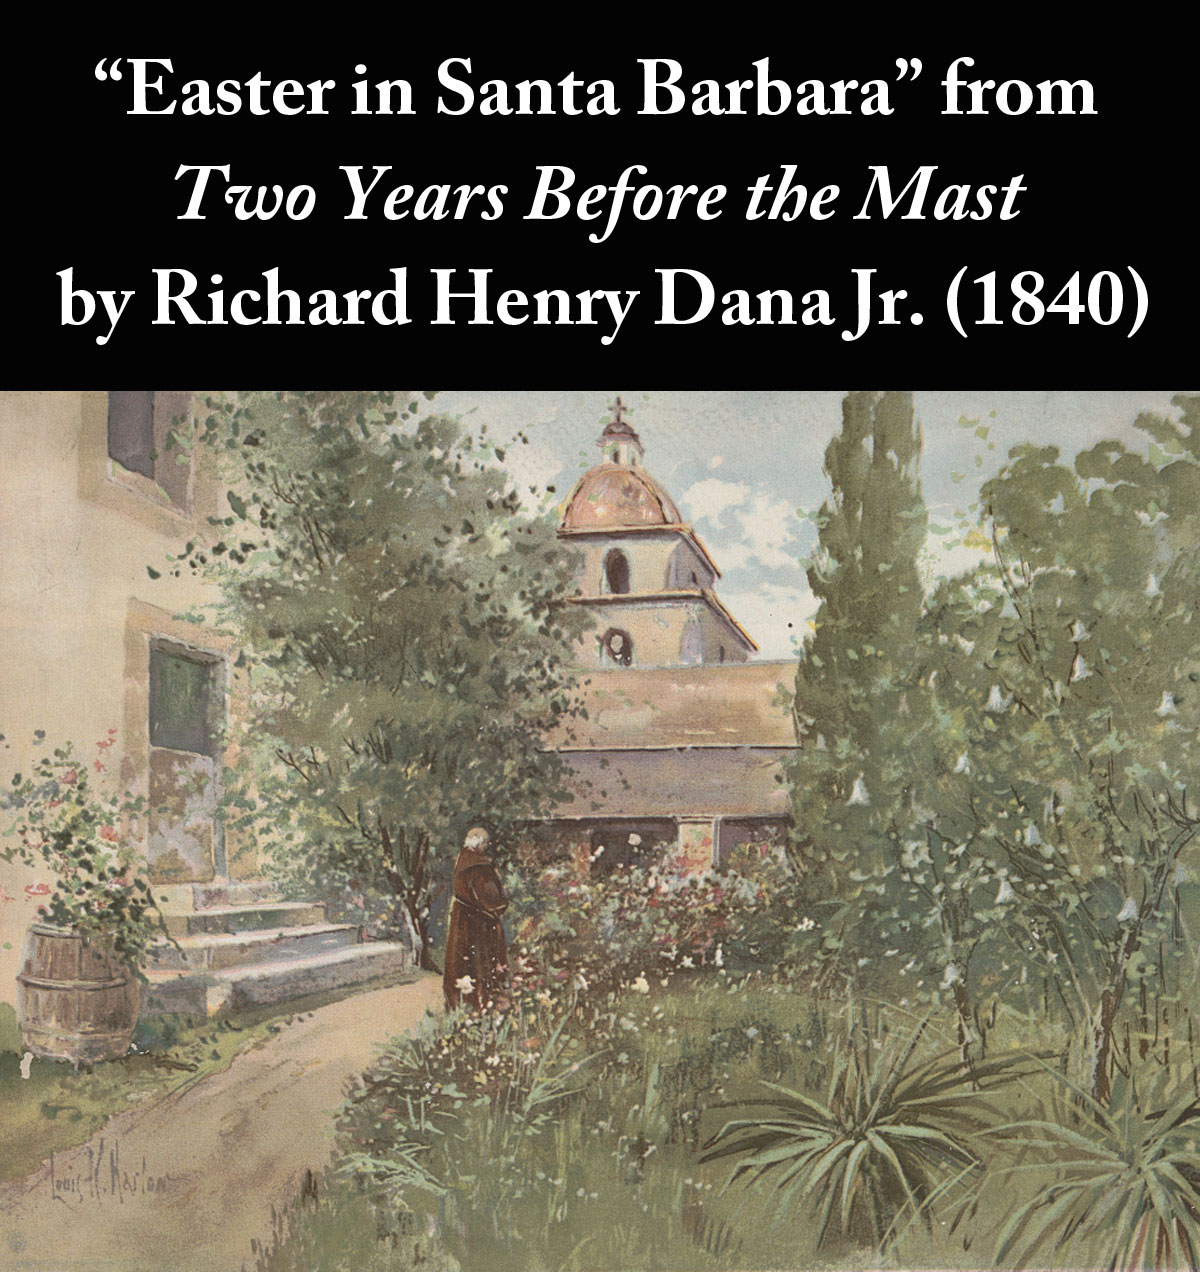 Easter in Santa Barbara from Two Years Before the Mast by Richard Henry Dana Jr. (1840)